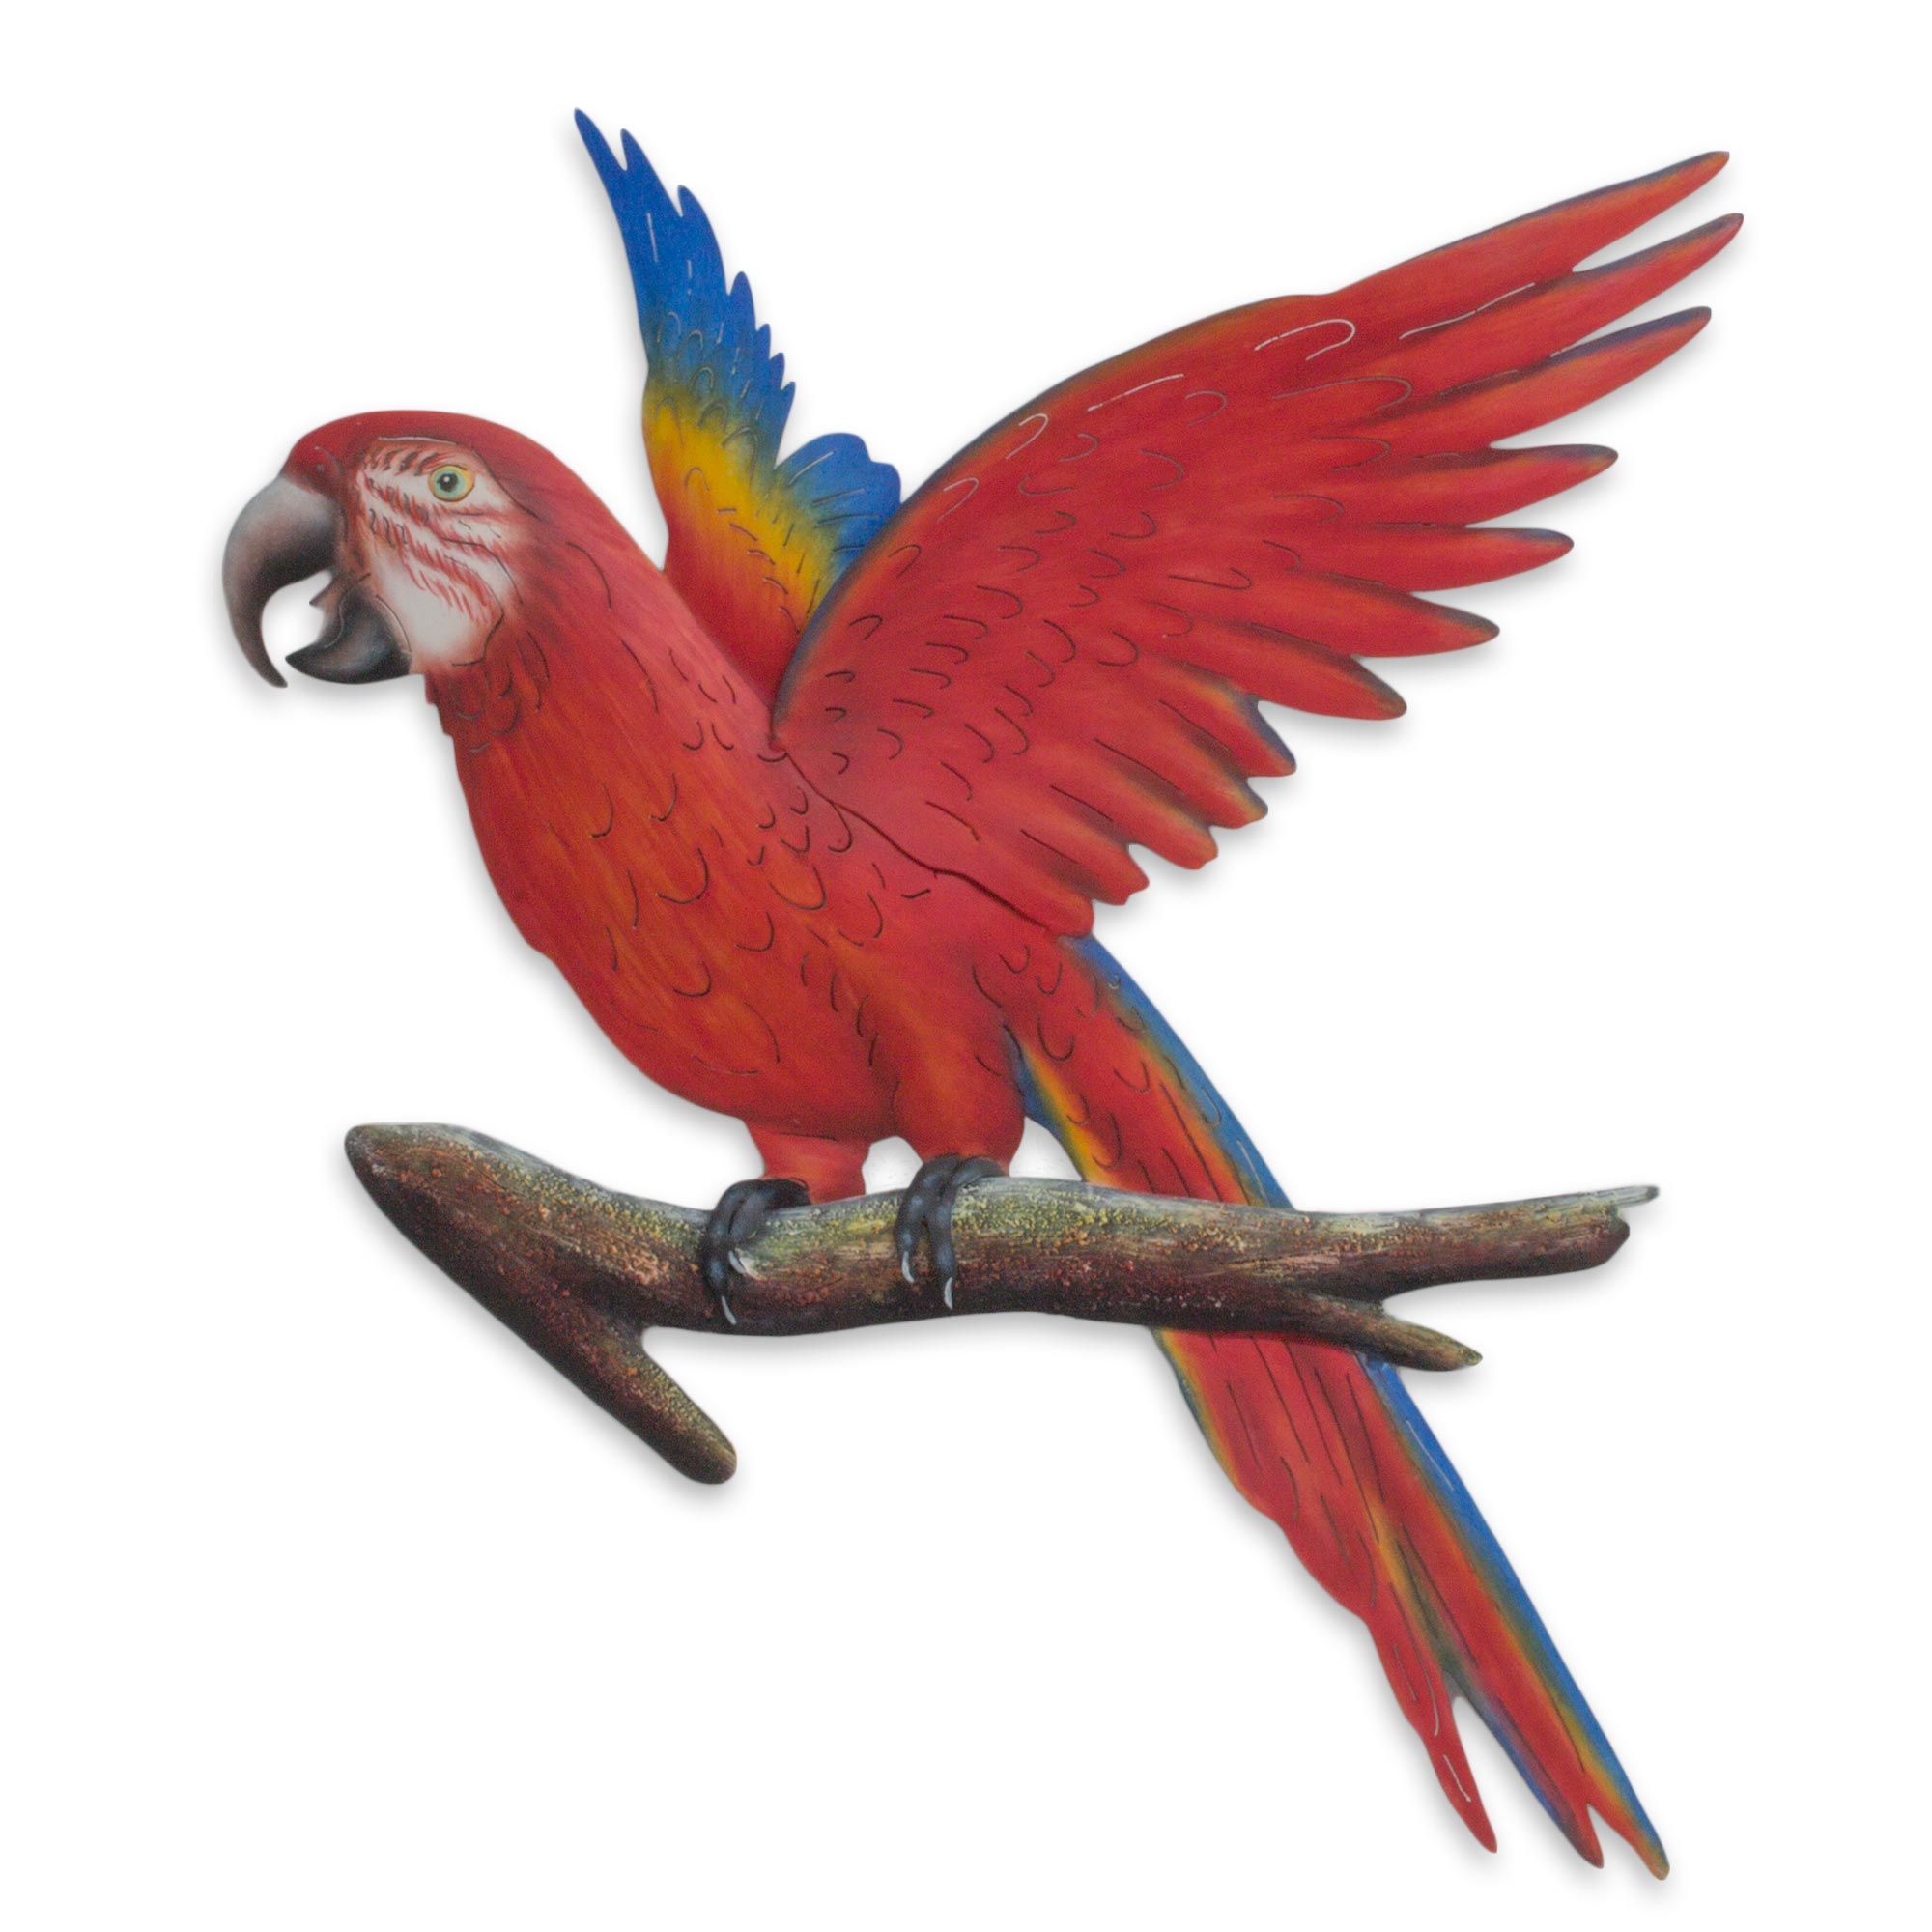 Unicef Market | Handcrafted Red Steel Bird Theme Wall Sculpture From Mexico  – Scarlet Macaw With Regard To Bird Macaw Wall Sculpture (View 3 of 15)